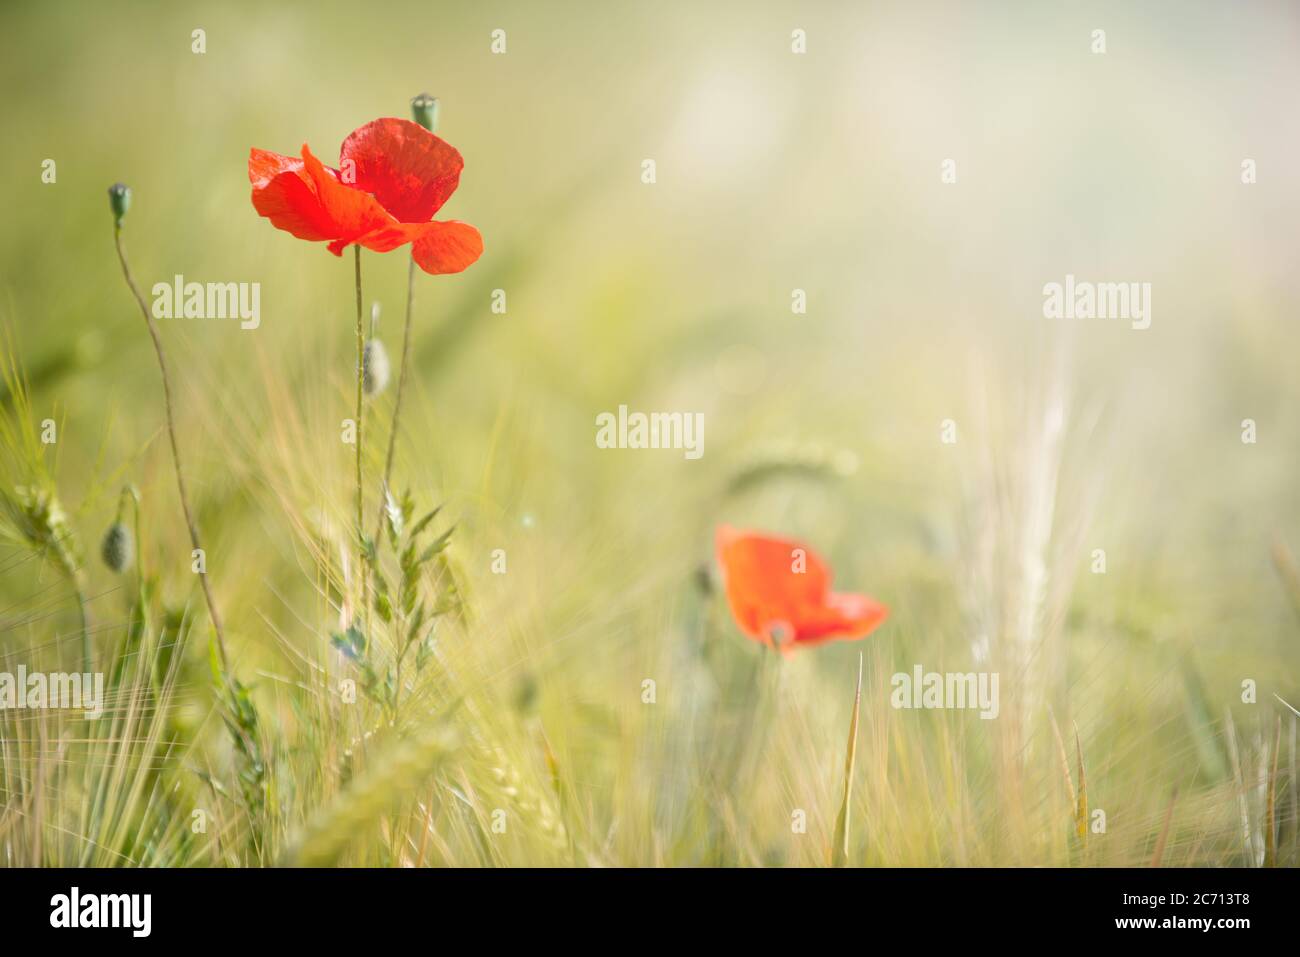 Red poppy flowers and oat plants in summer field with sun, blurred nature background Stock Photo